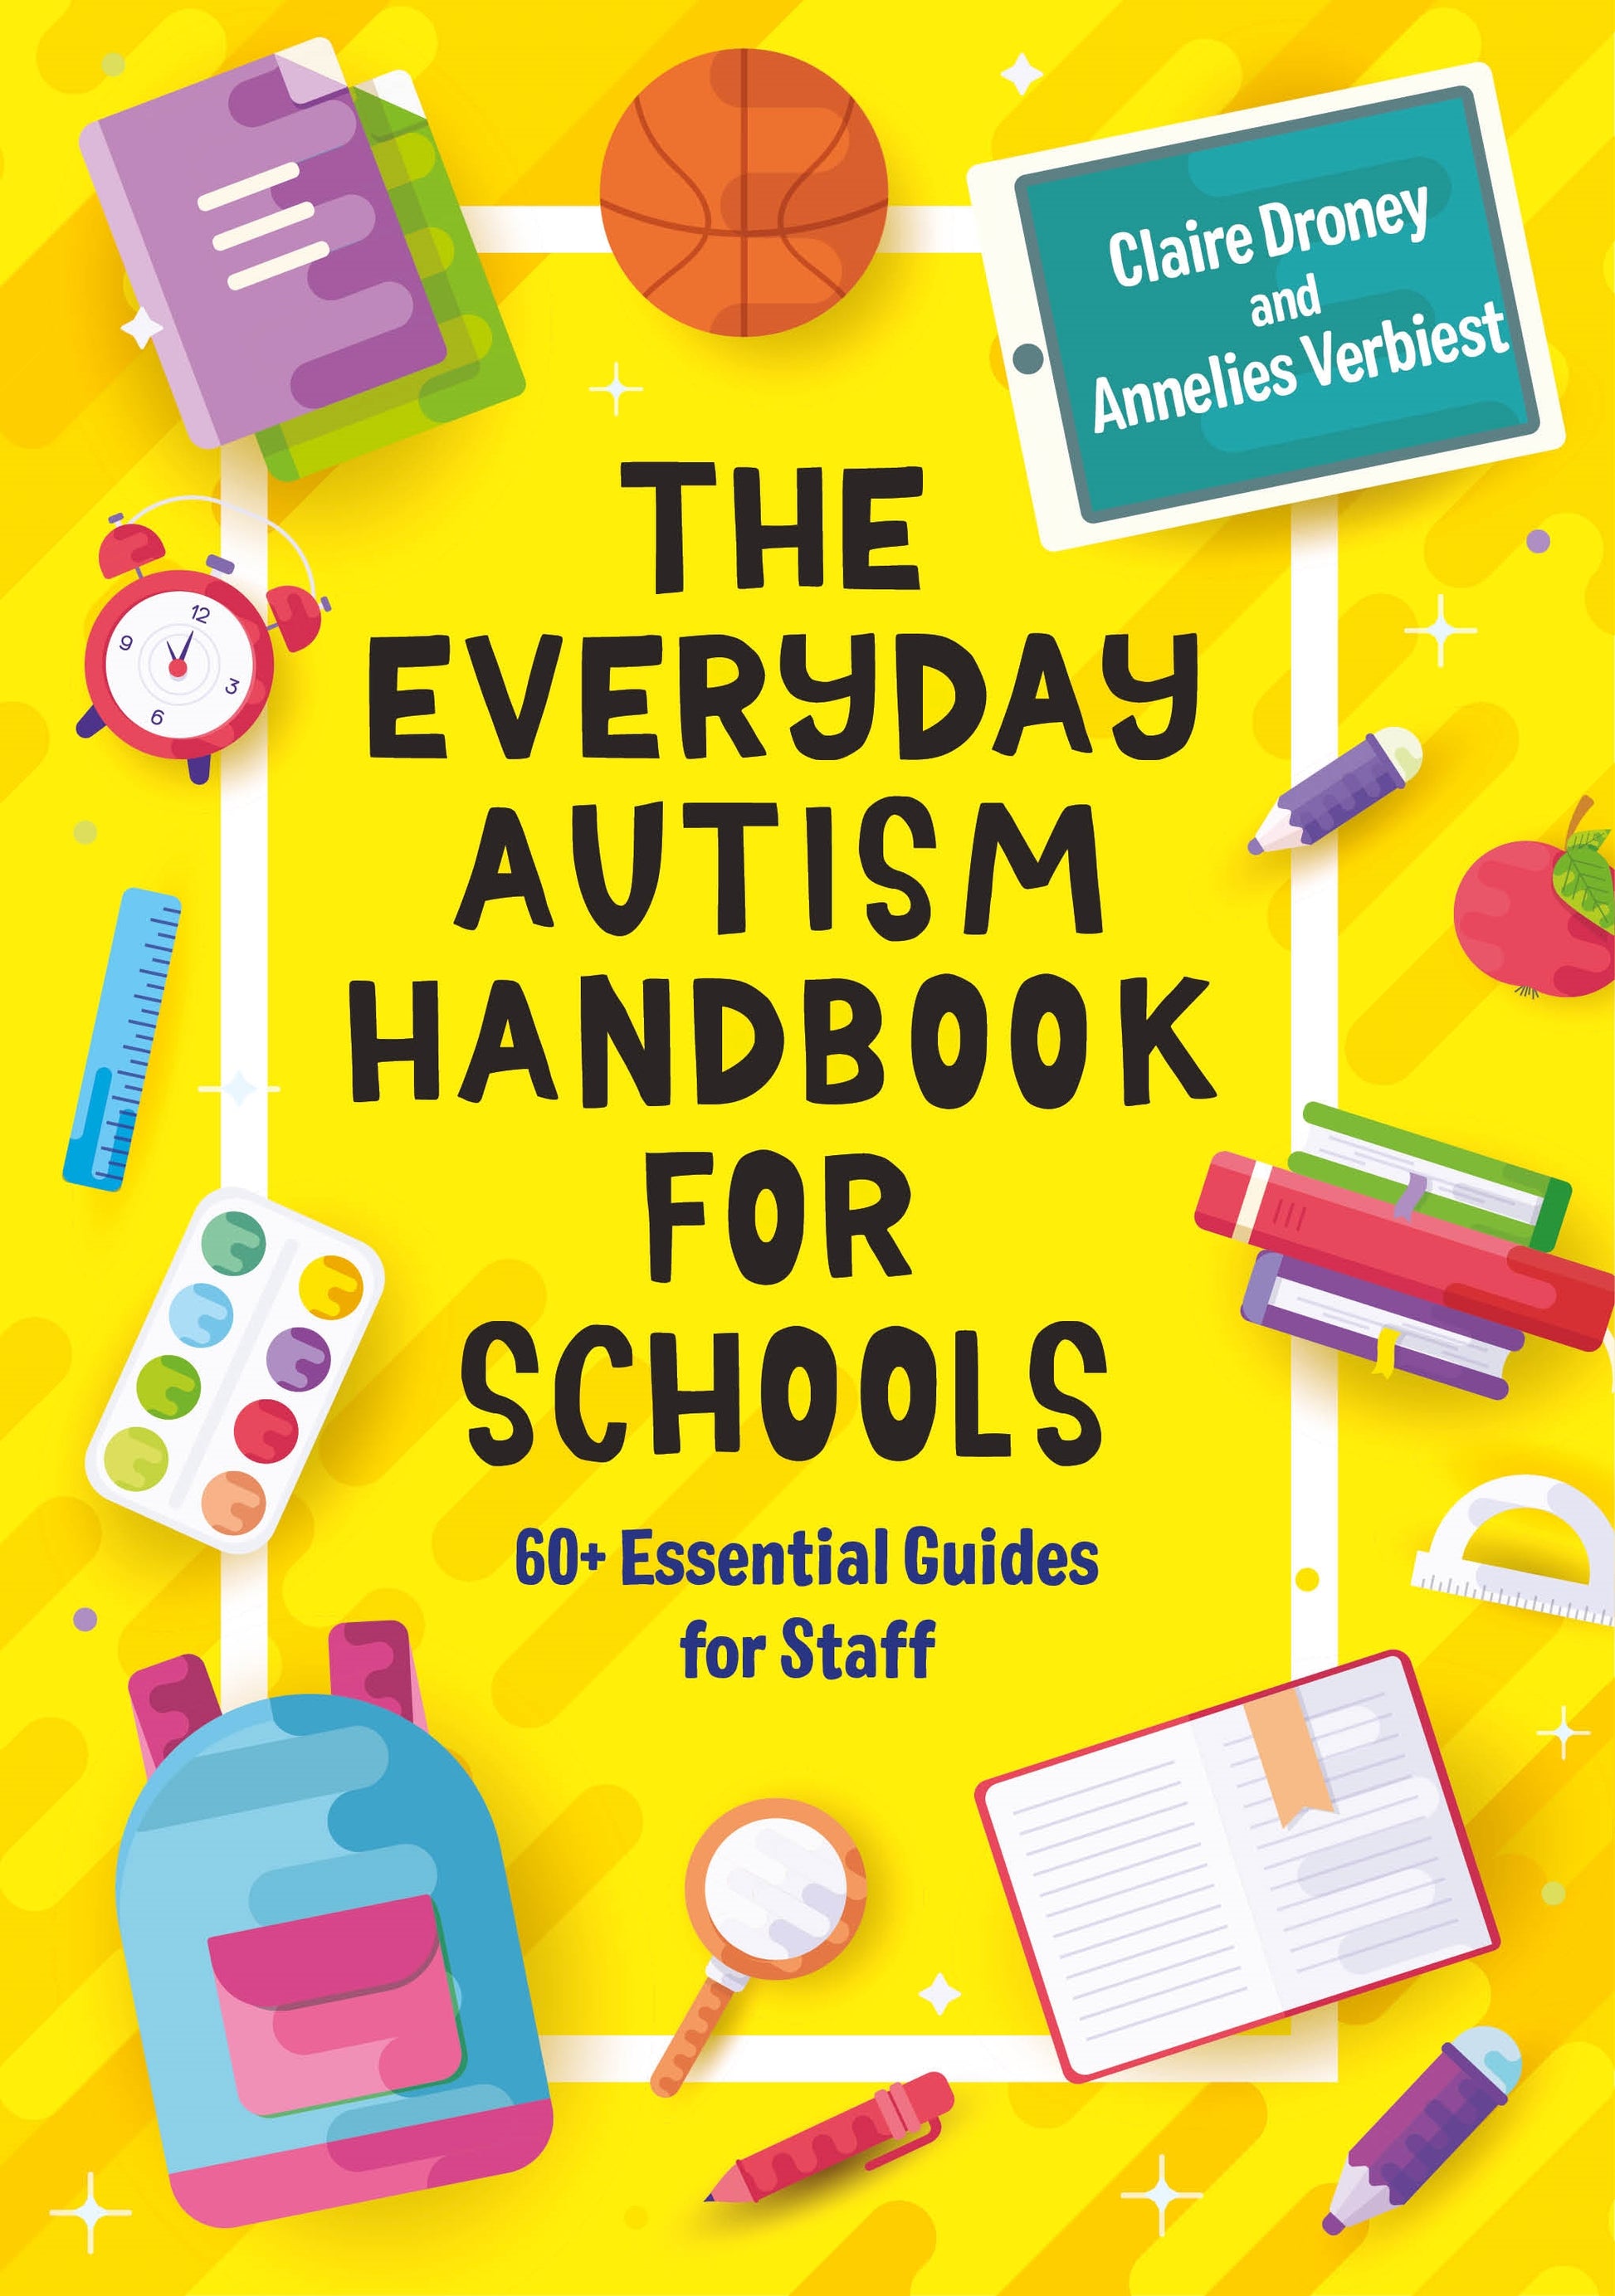 The Everyday Autism Handbook for Schools by Claire Droney, Annelies Verbiest, Melanie Corr